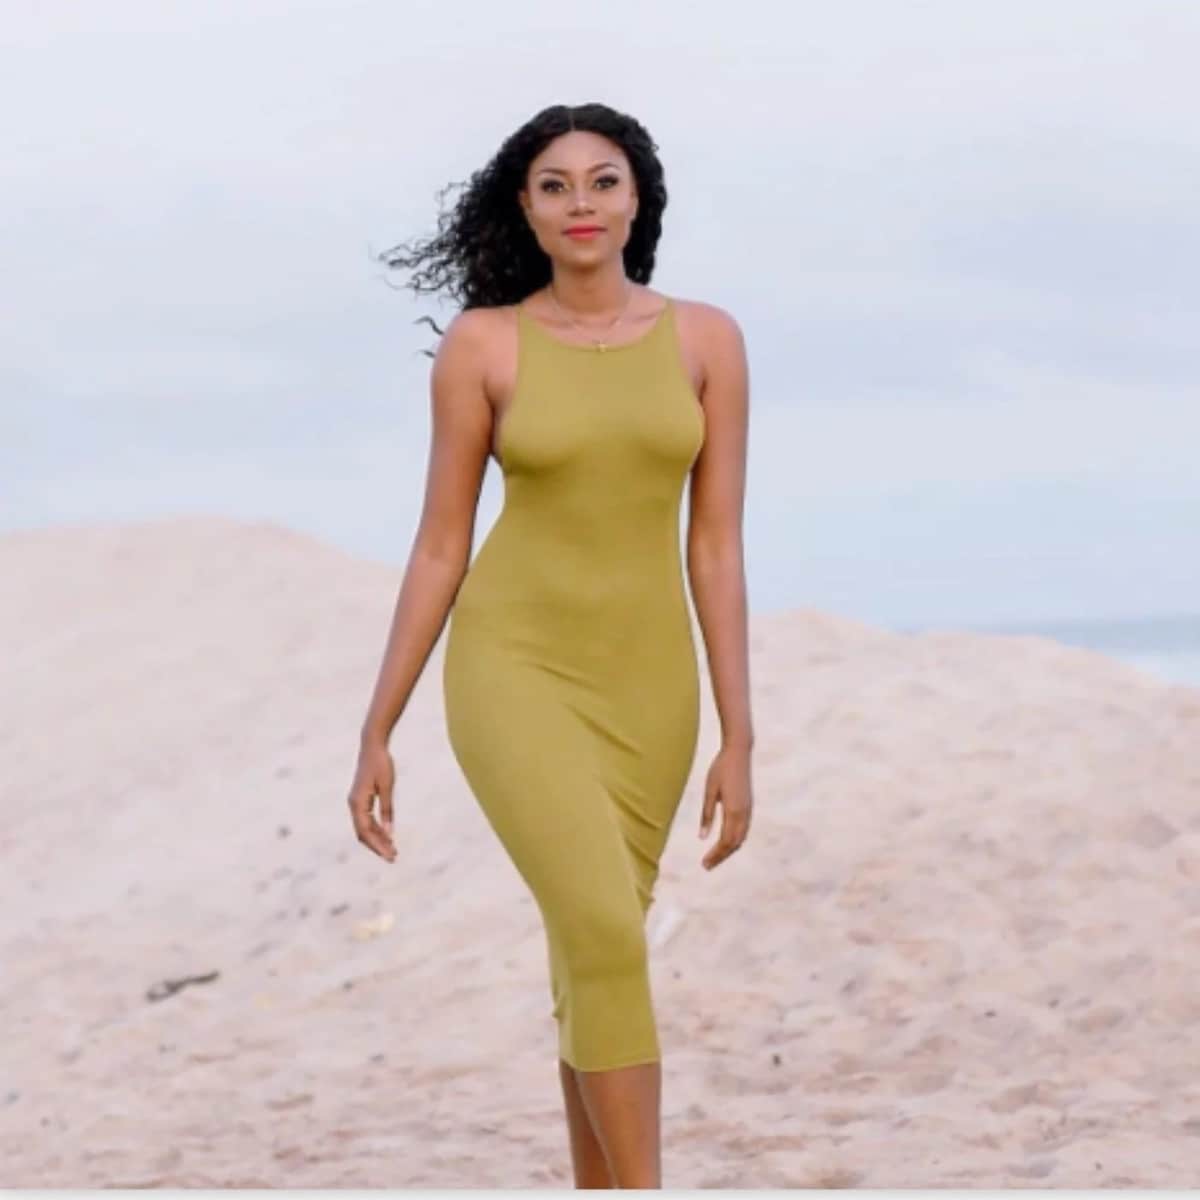 Throwback photo of Yvonne Nelson proves she was not always 'slim'